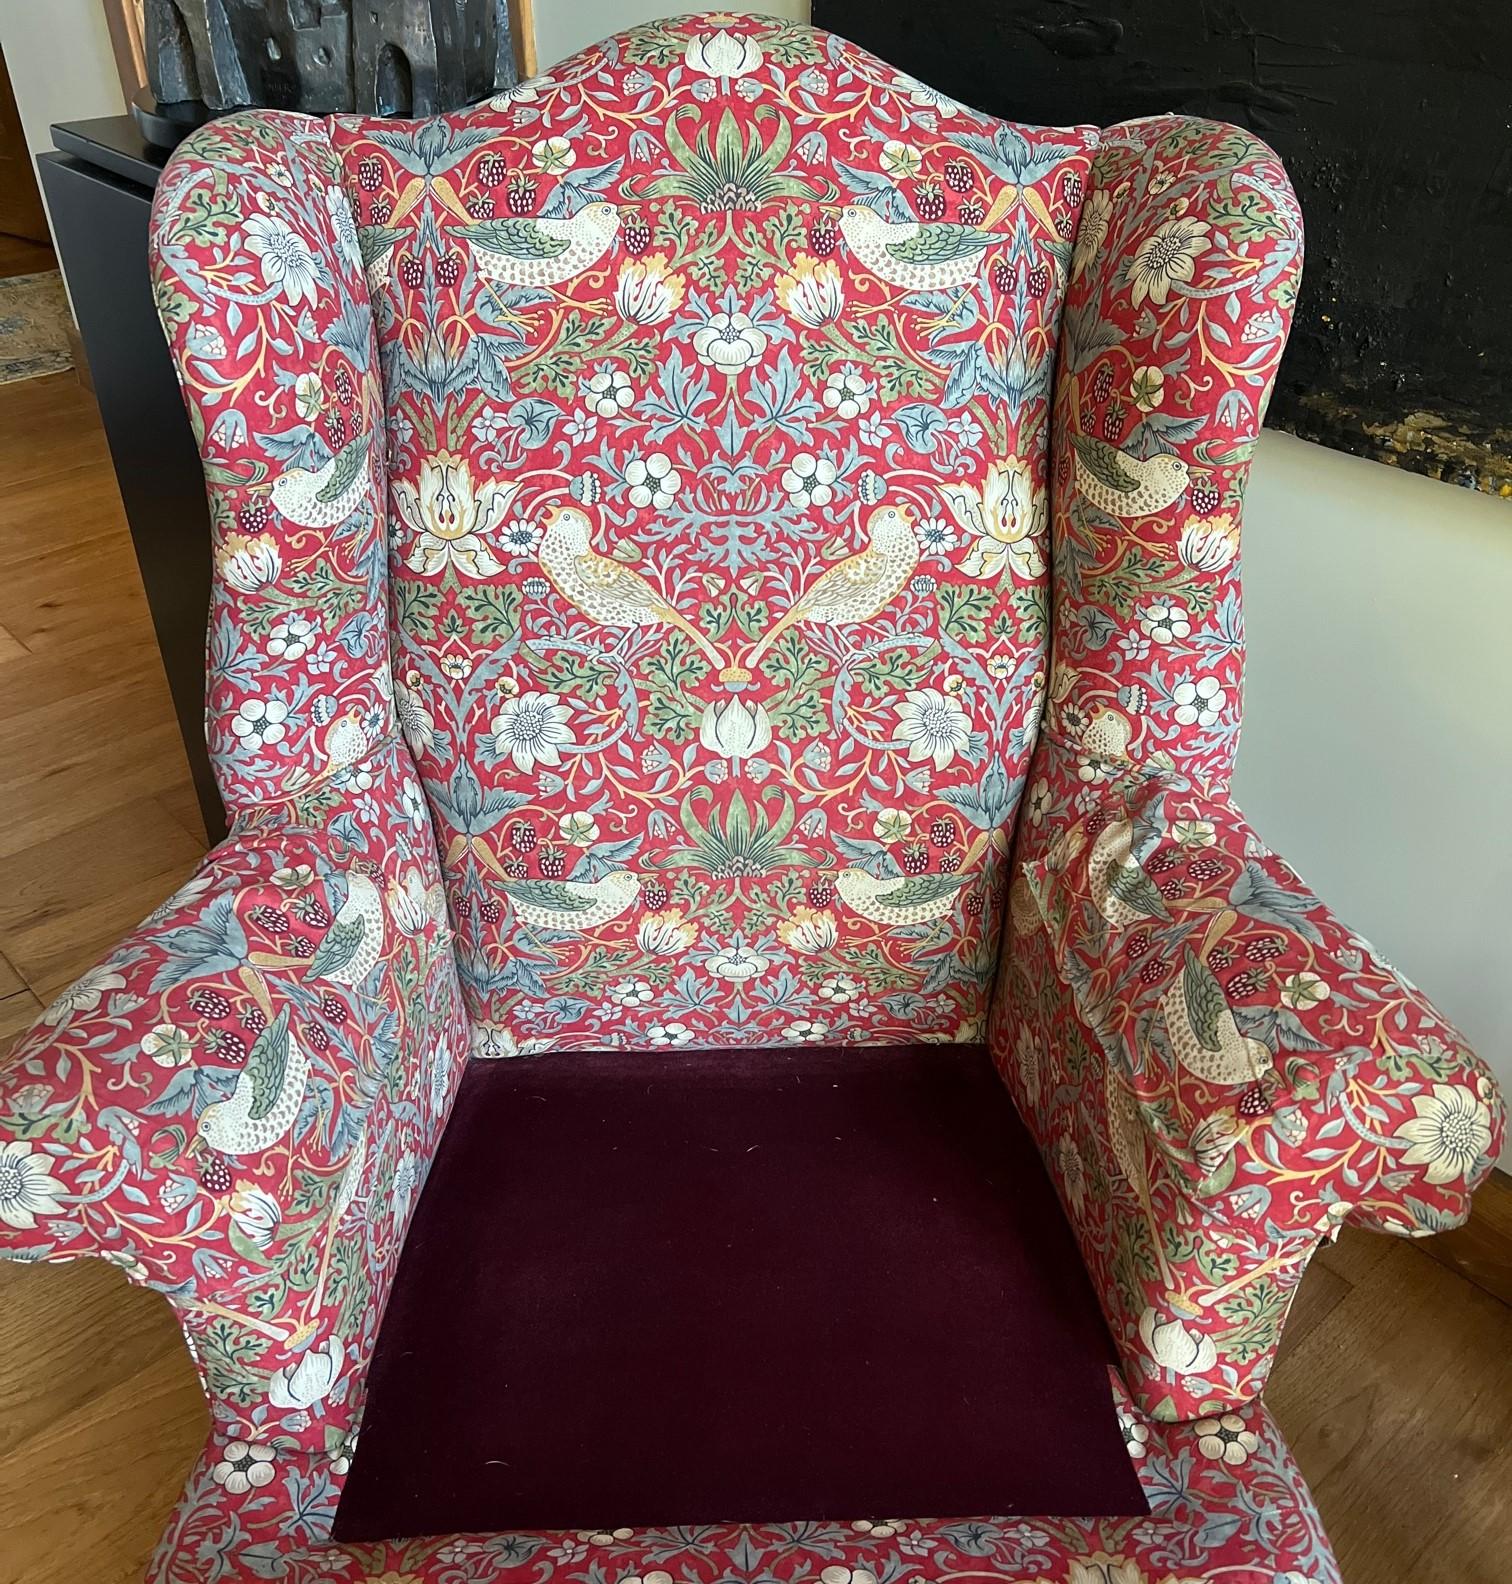 A vintage, roomy wingback armchair and ottoman reupholstered in the iconic 